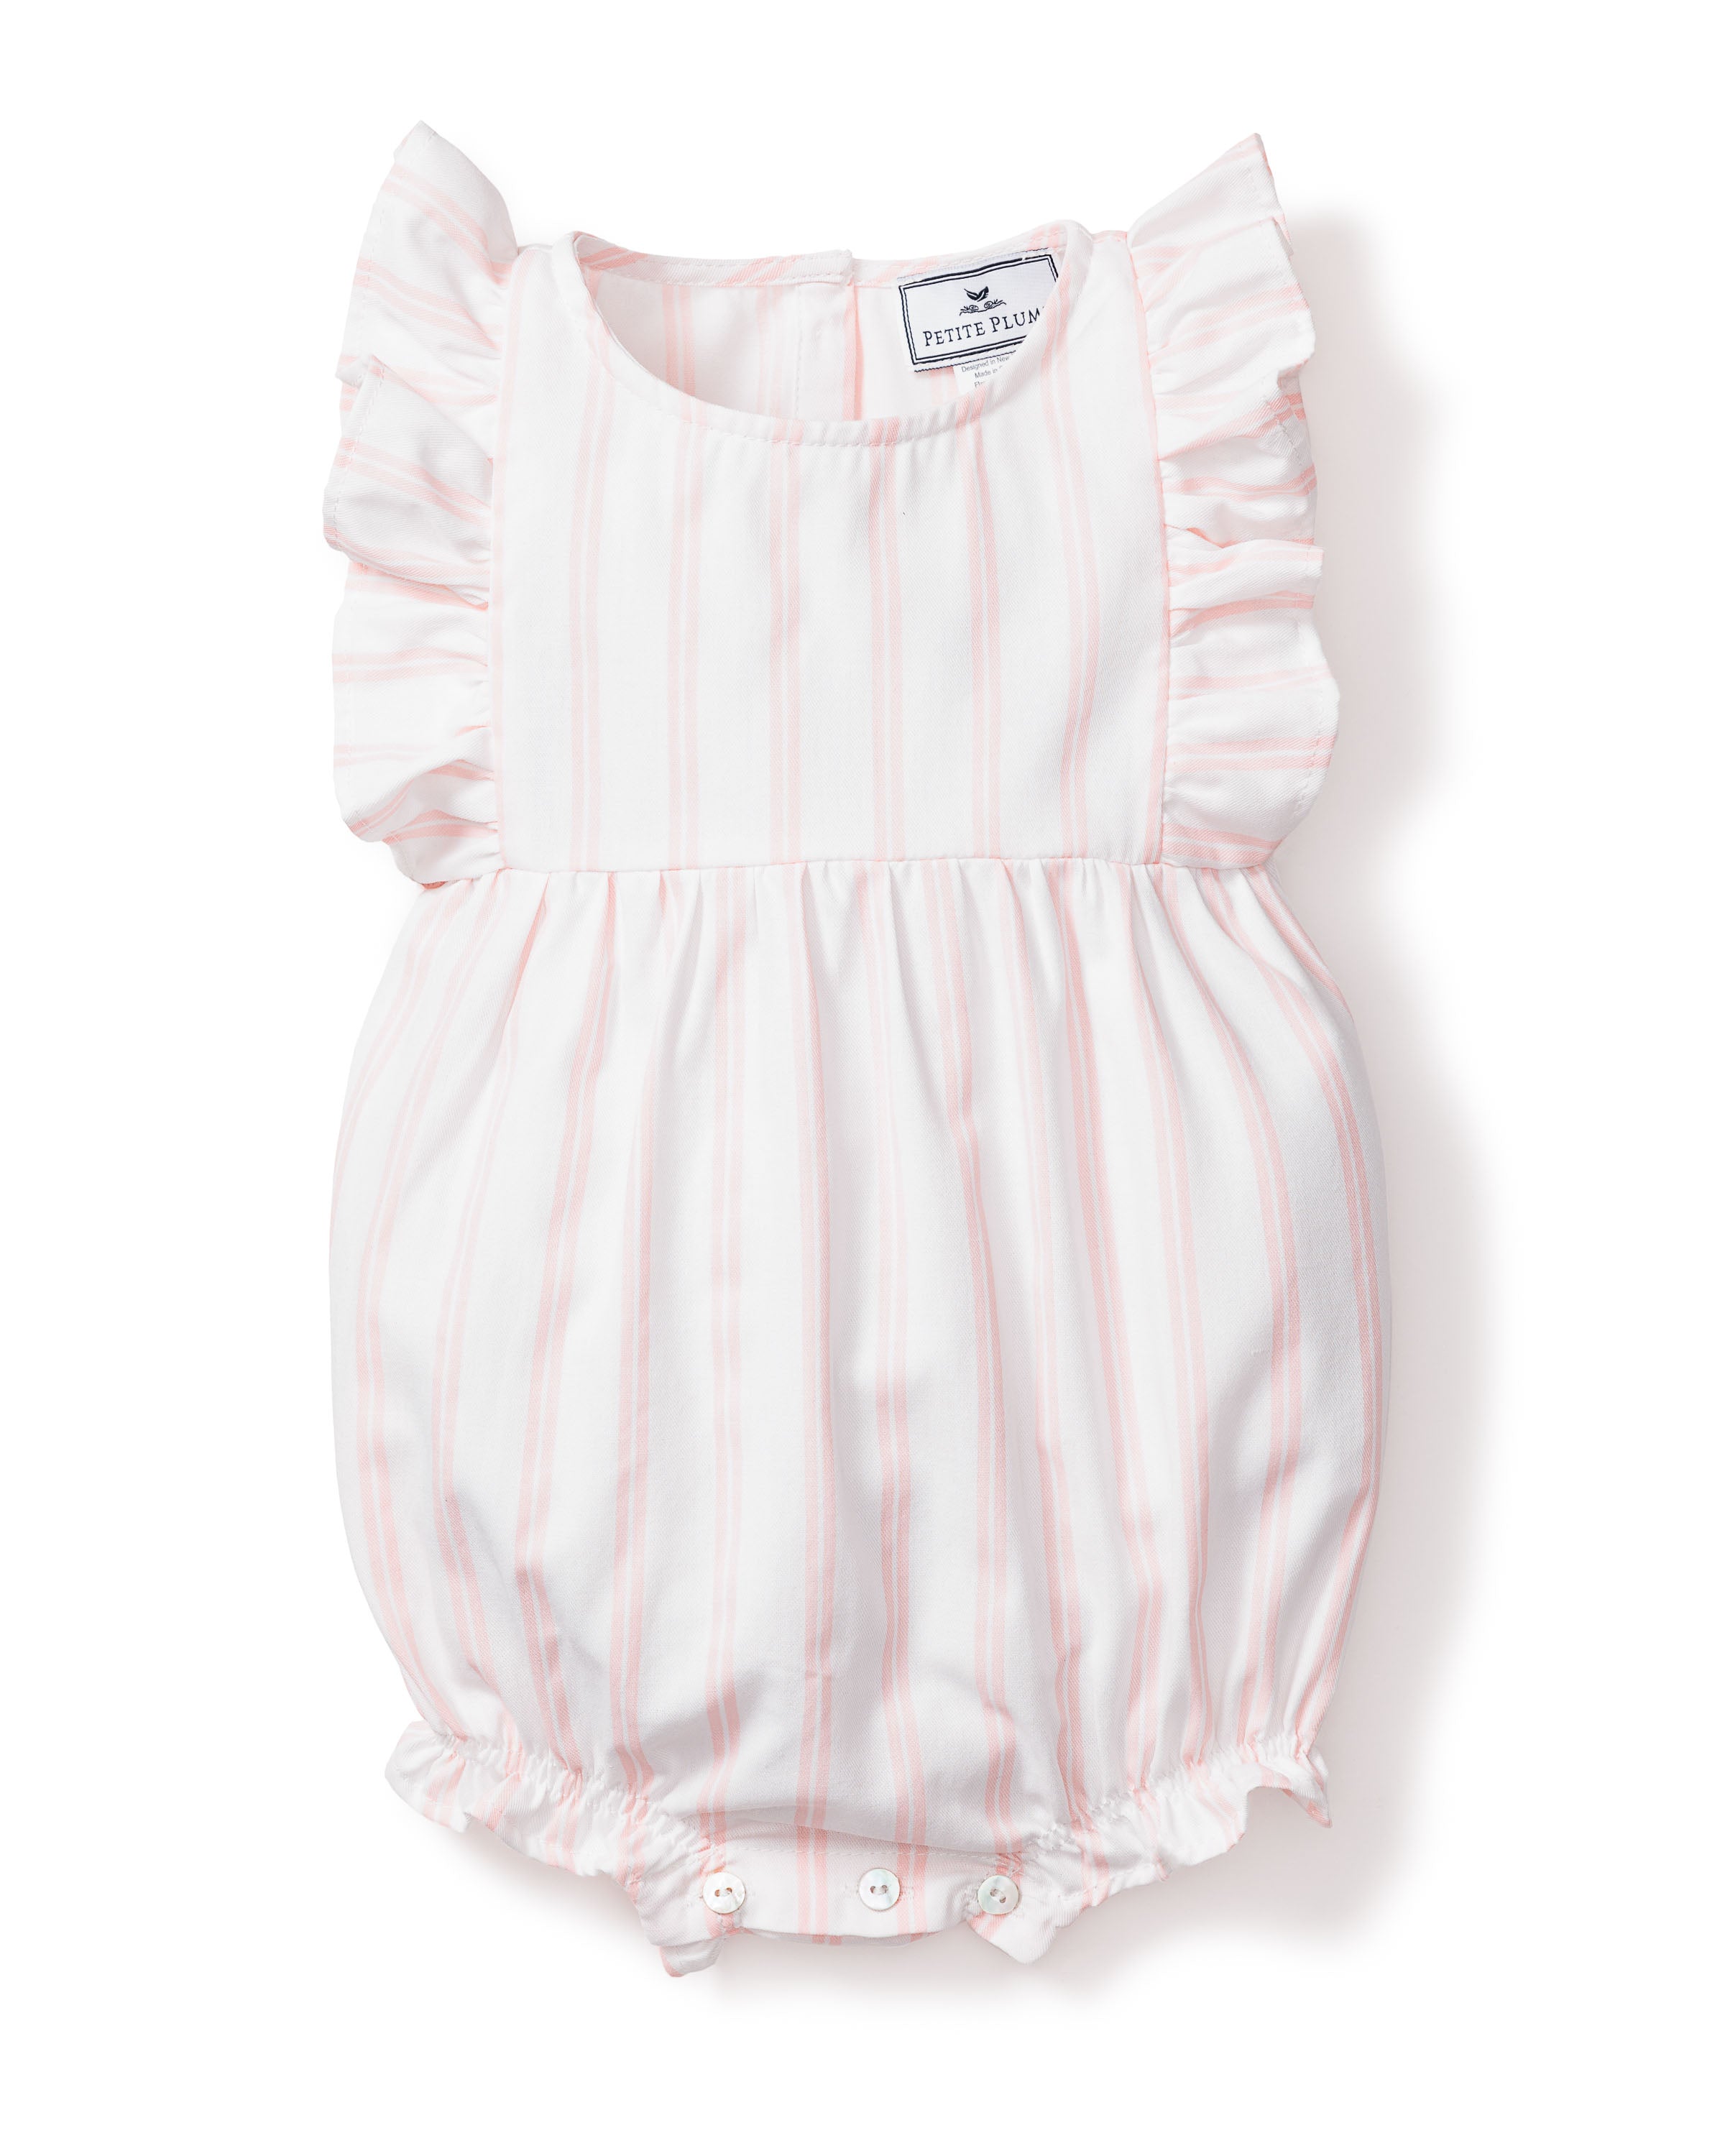 Baby's Twill Stripe Ruffled Romper in Pink and White Stripe